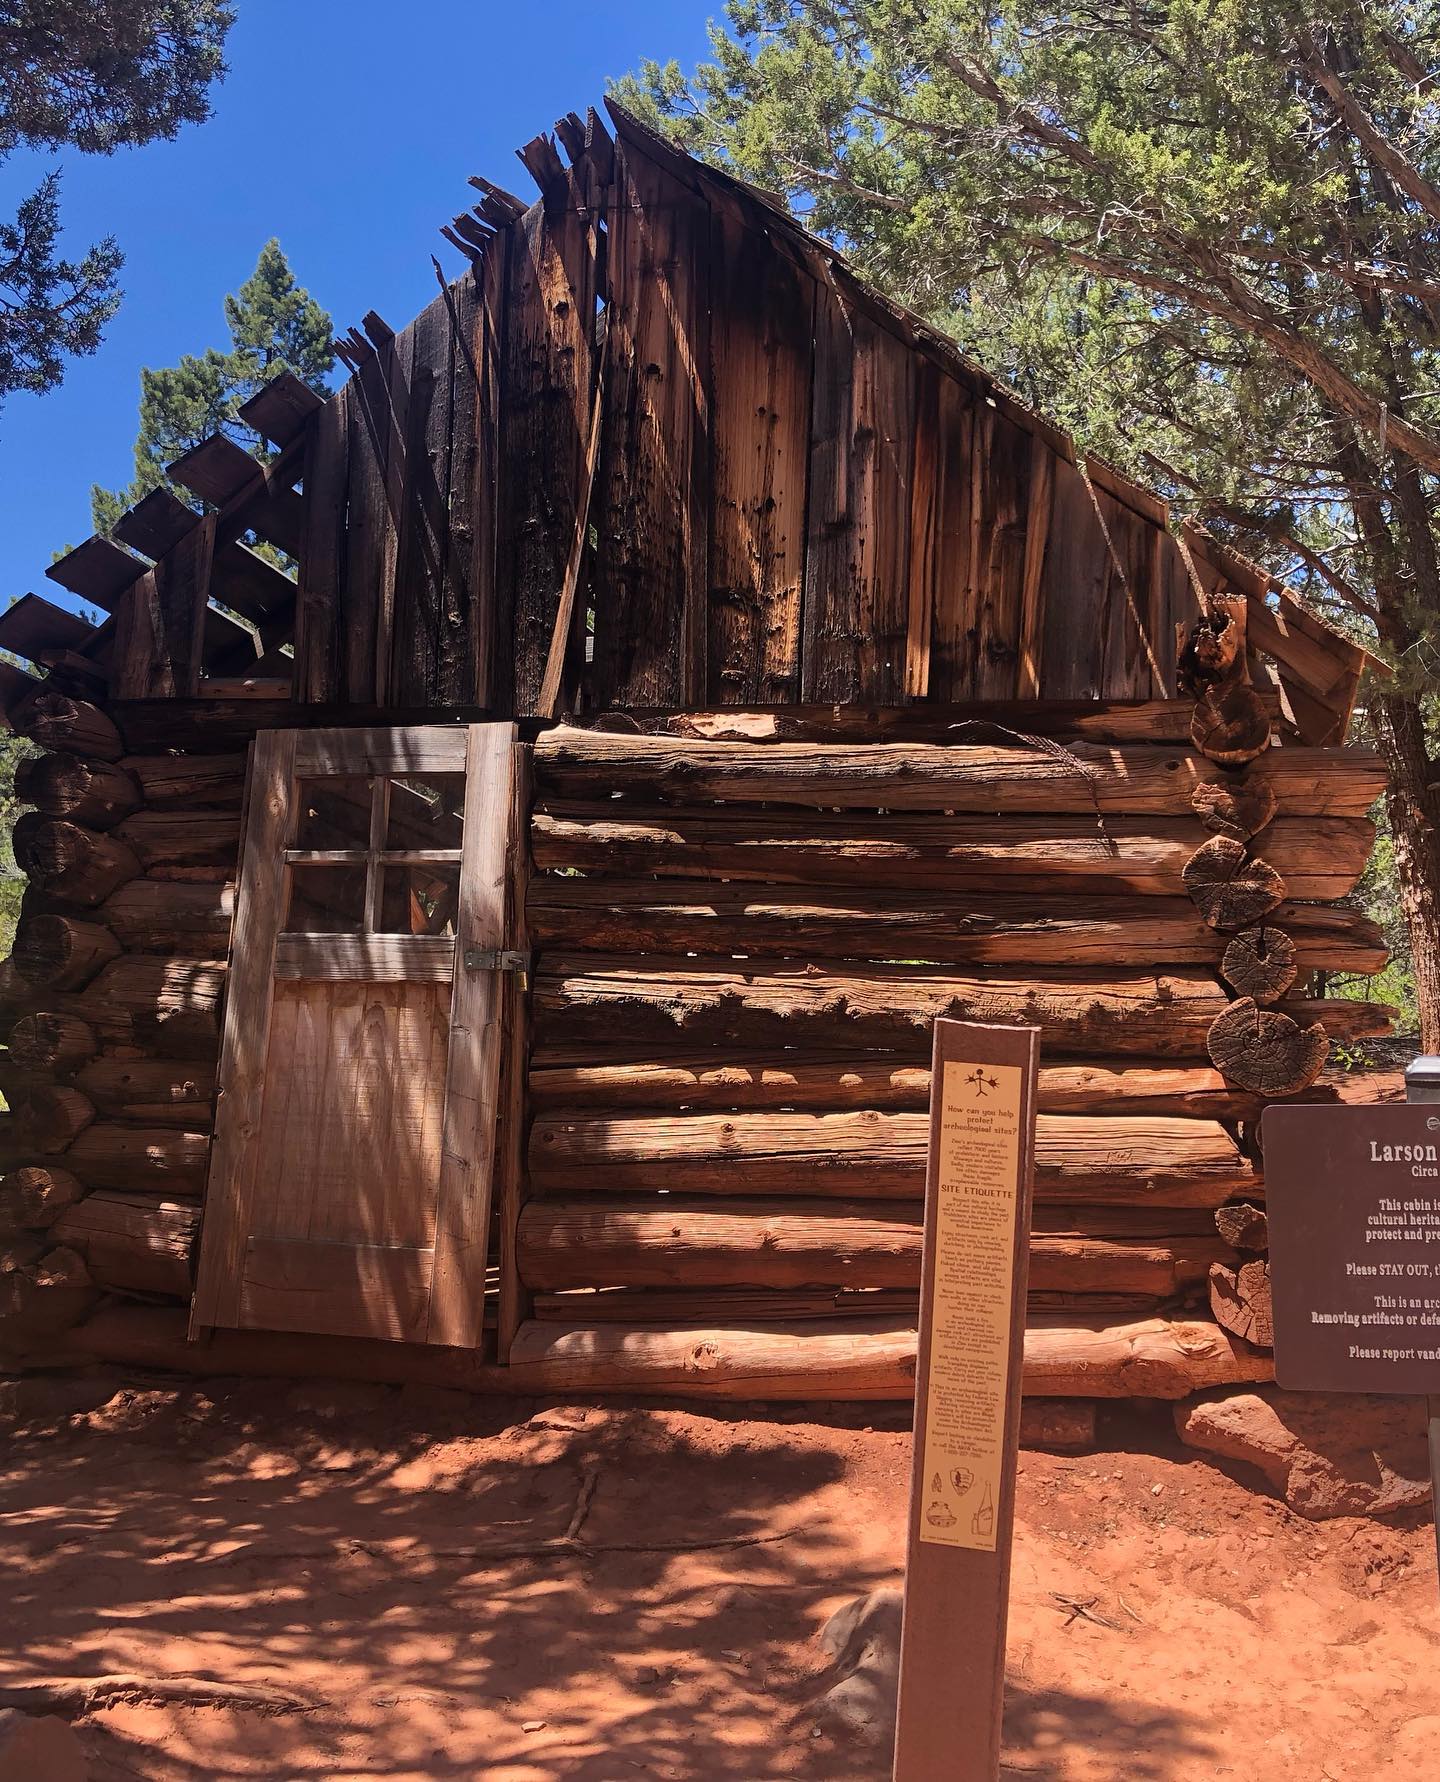 Front of the Larson Cabin in Zion National Park on May 14, 2021